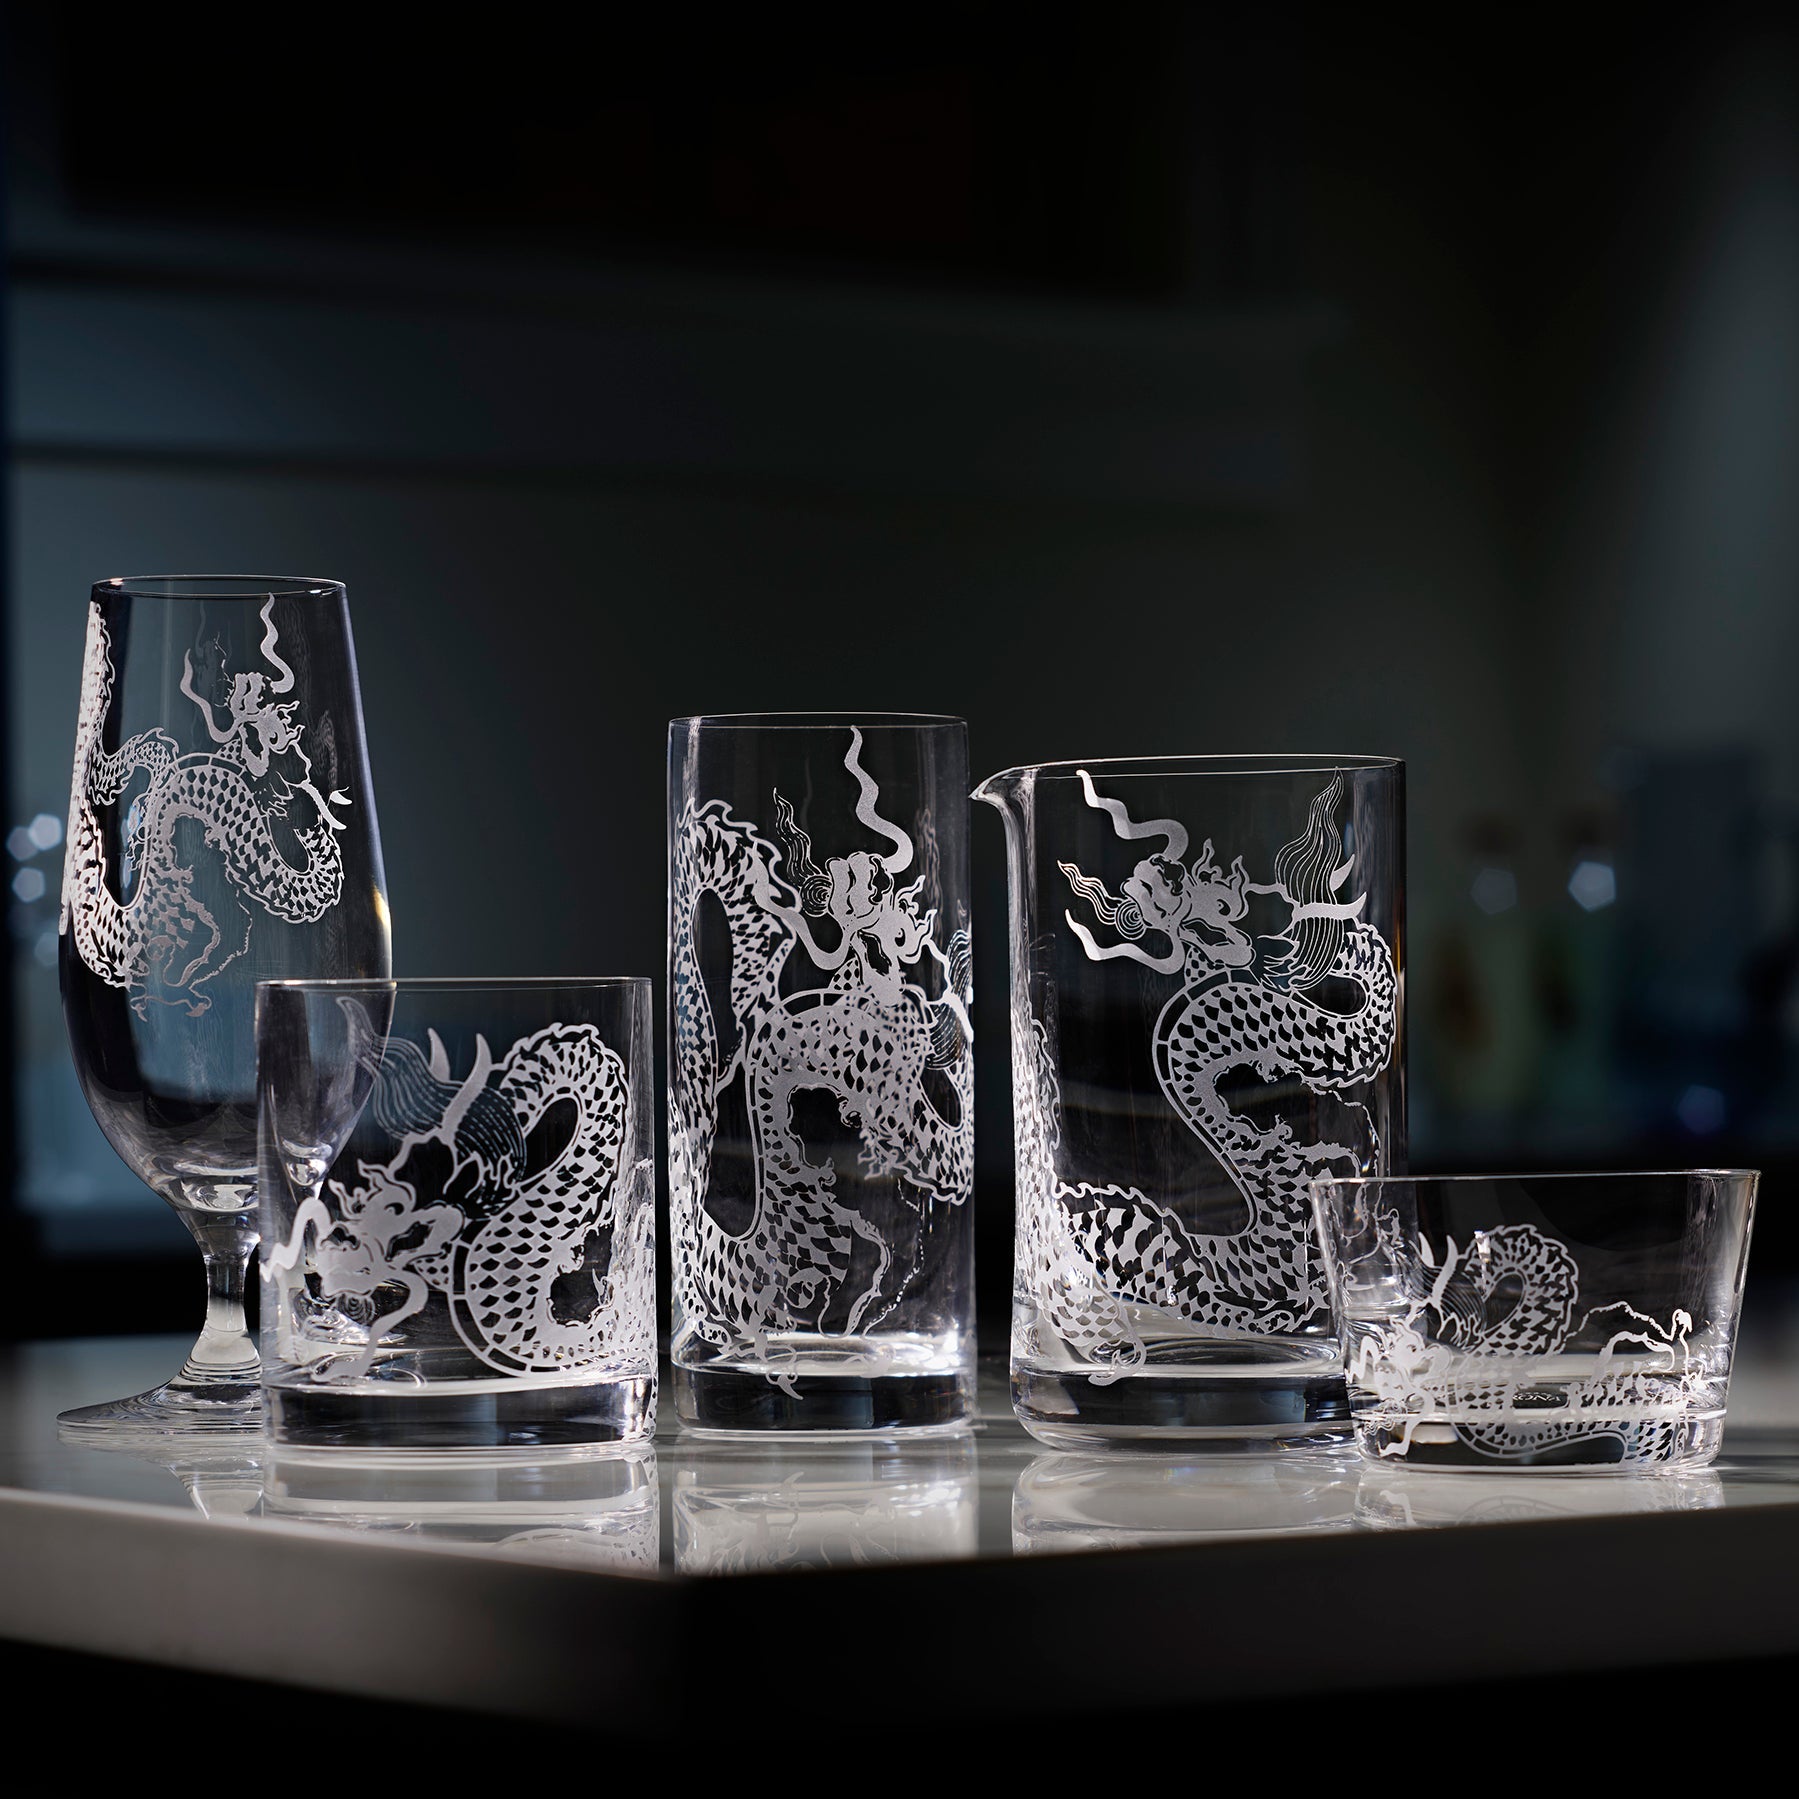 The Dragon collection by Caskata includes a sand-etched crystal tidbit bowl and matching beer, short, tall, and mixing glasses.